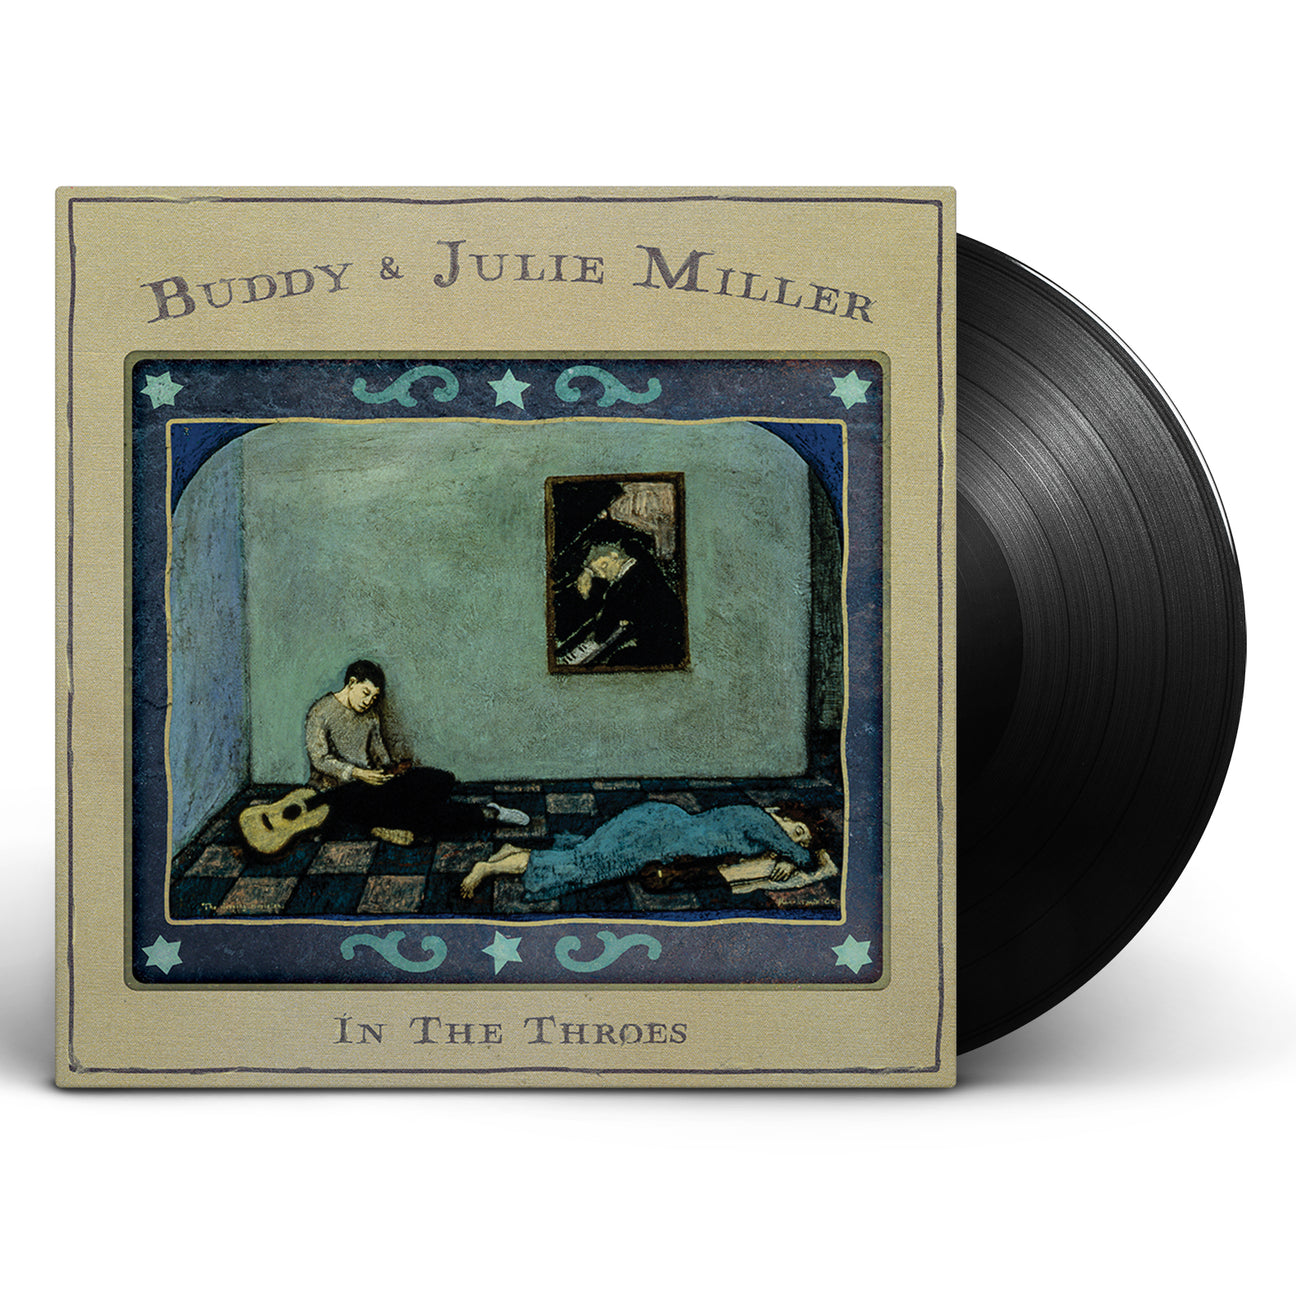 Buddy & Judy Miller: In The Throes Vinyl LP